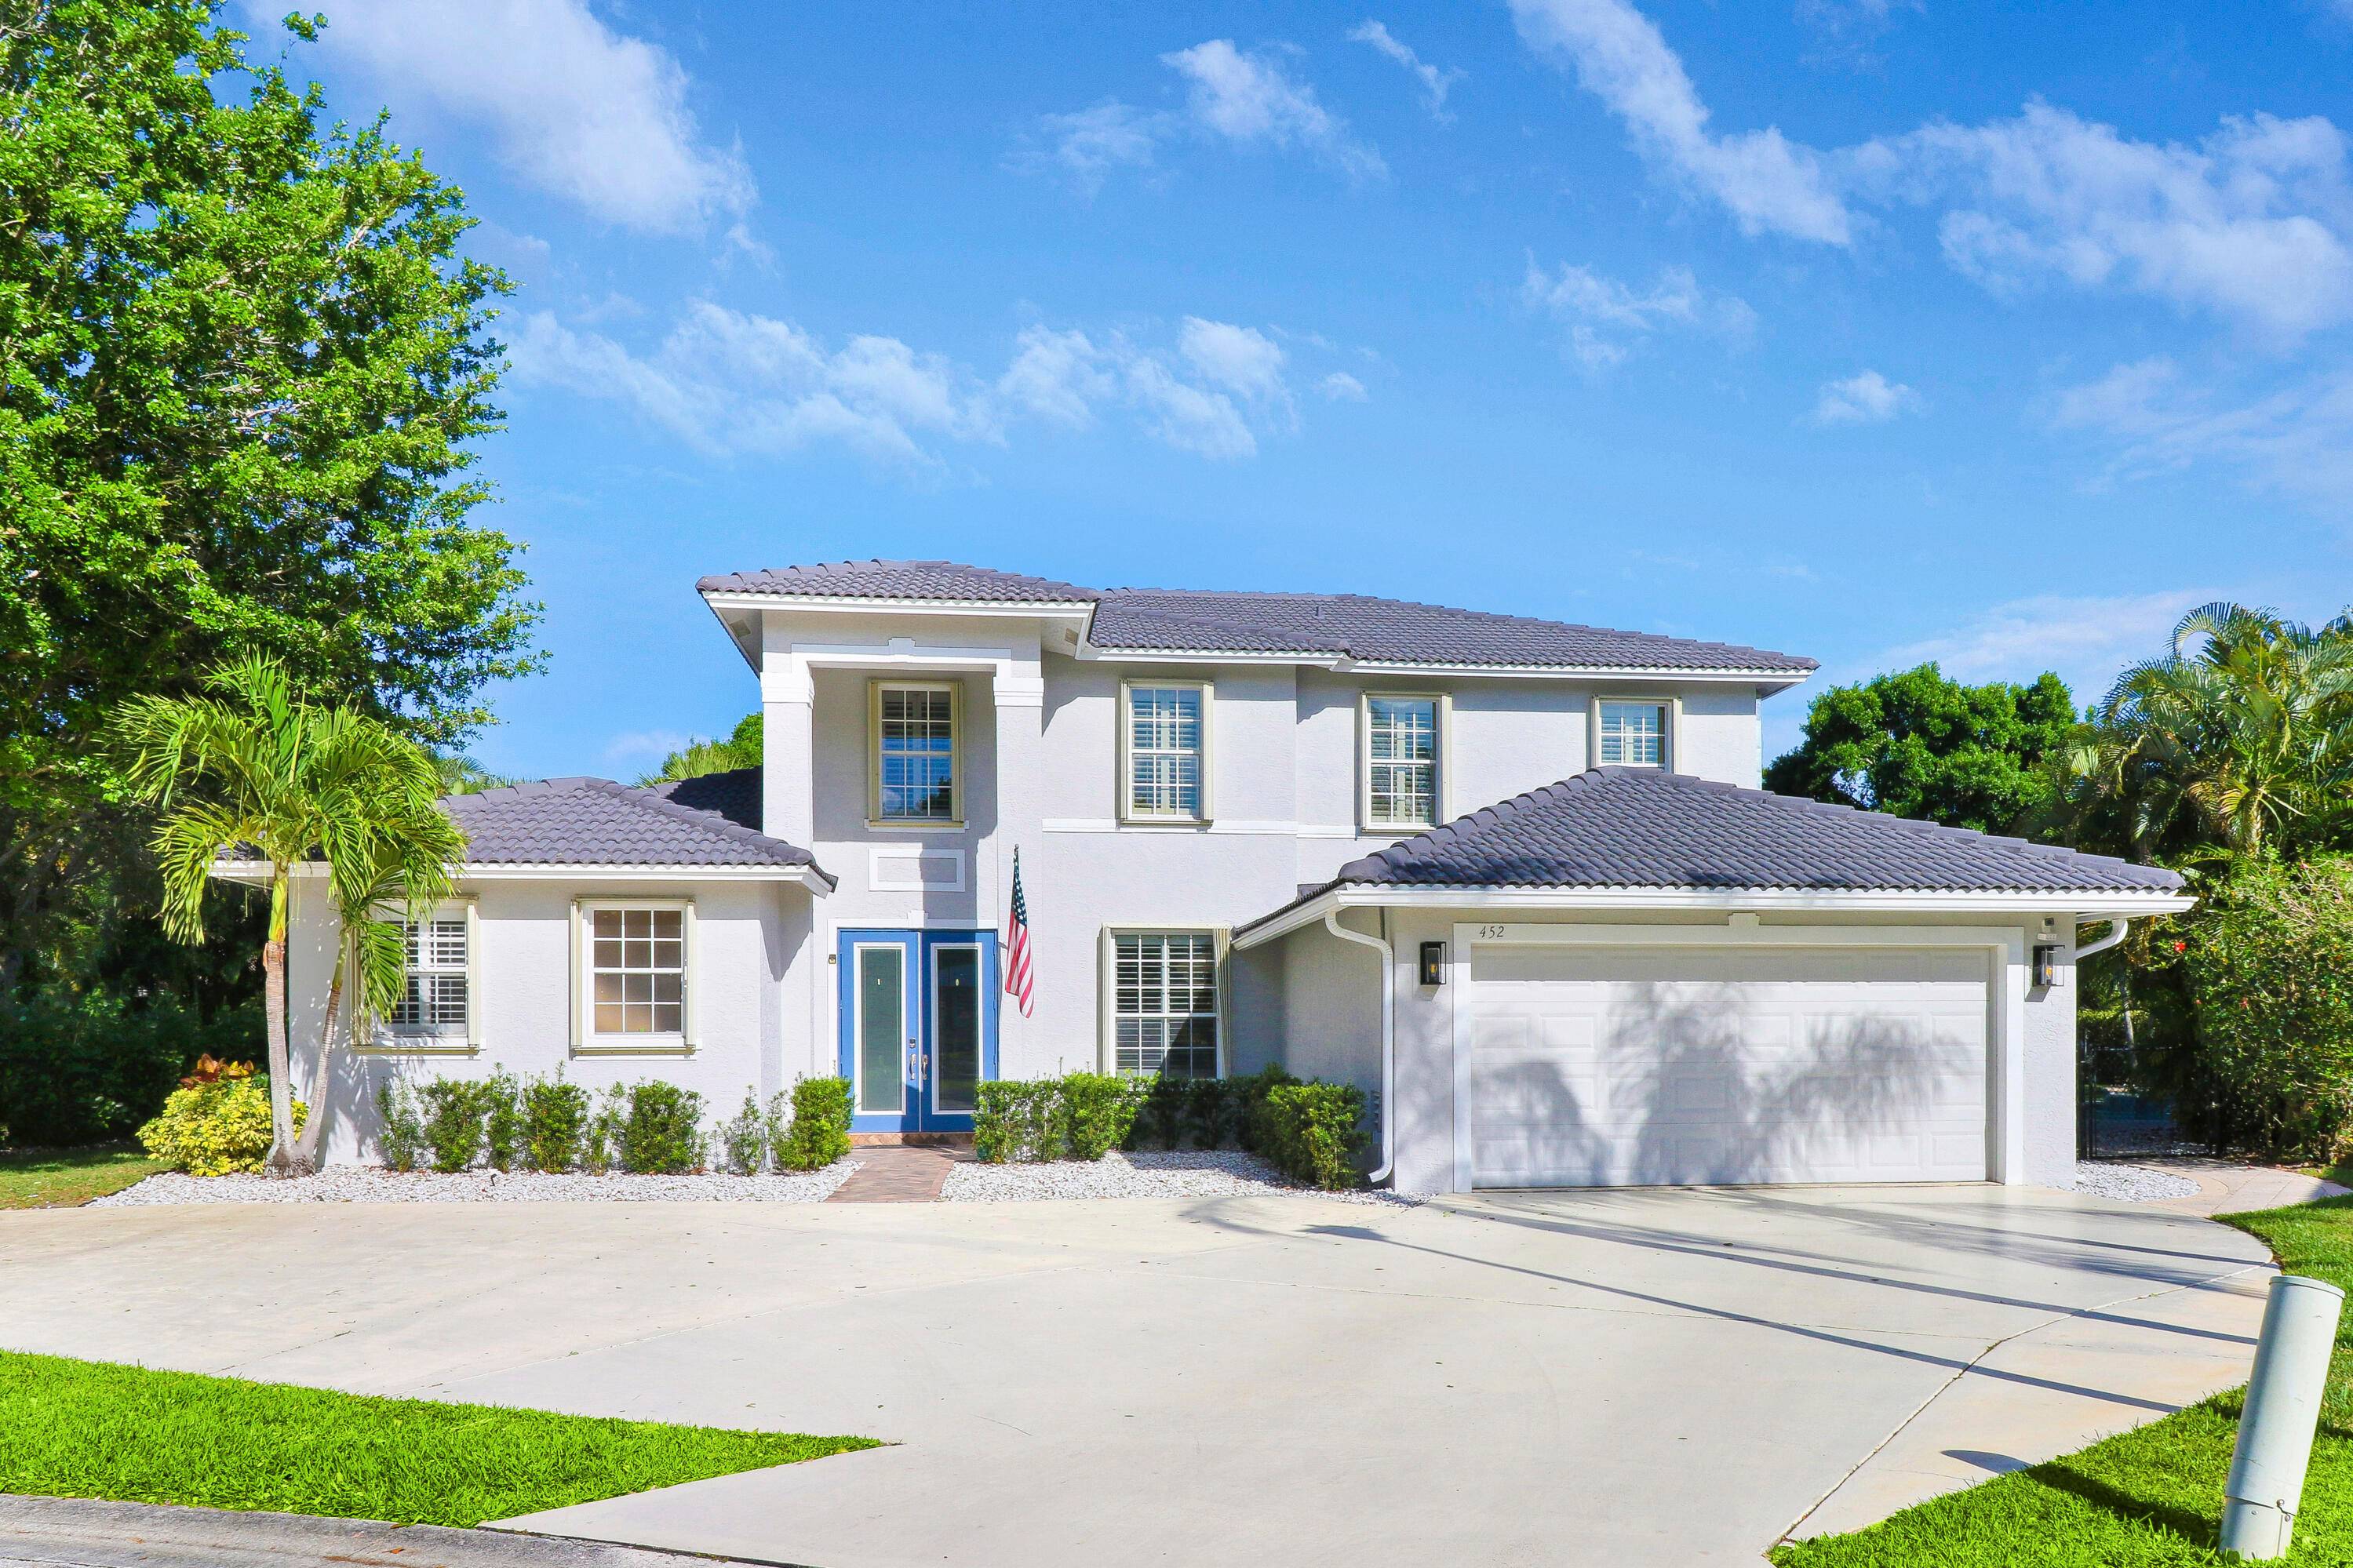 In the charming town of Jupiter, Florida, this spacious four bedroom, two and a half bathroom home nestled within the sought after Egret Landing community offers a harmonious blend of ...